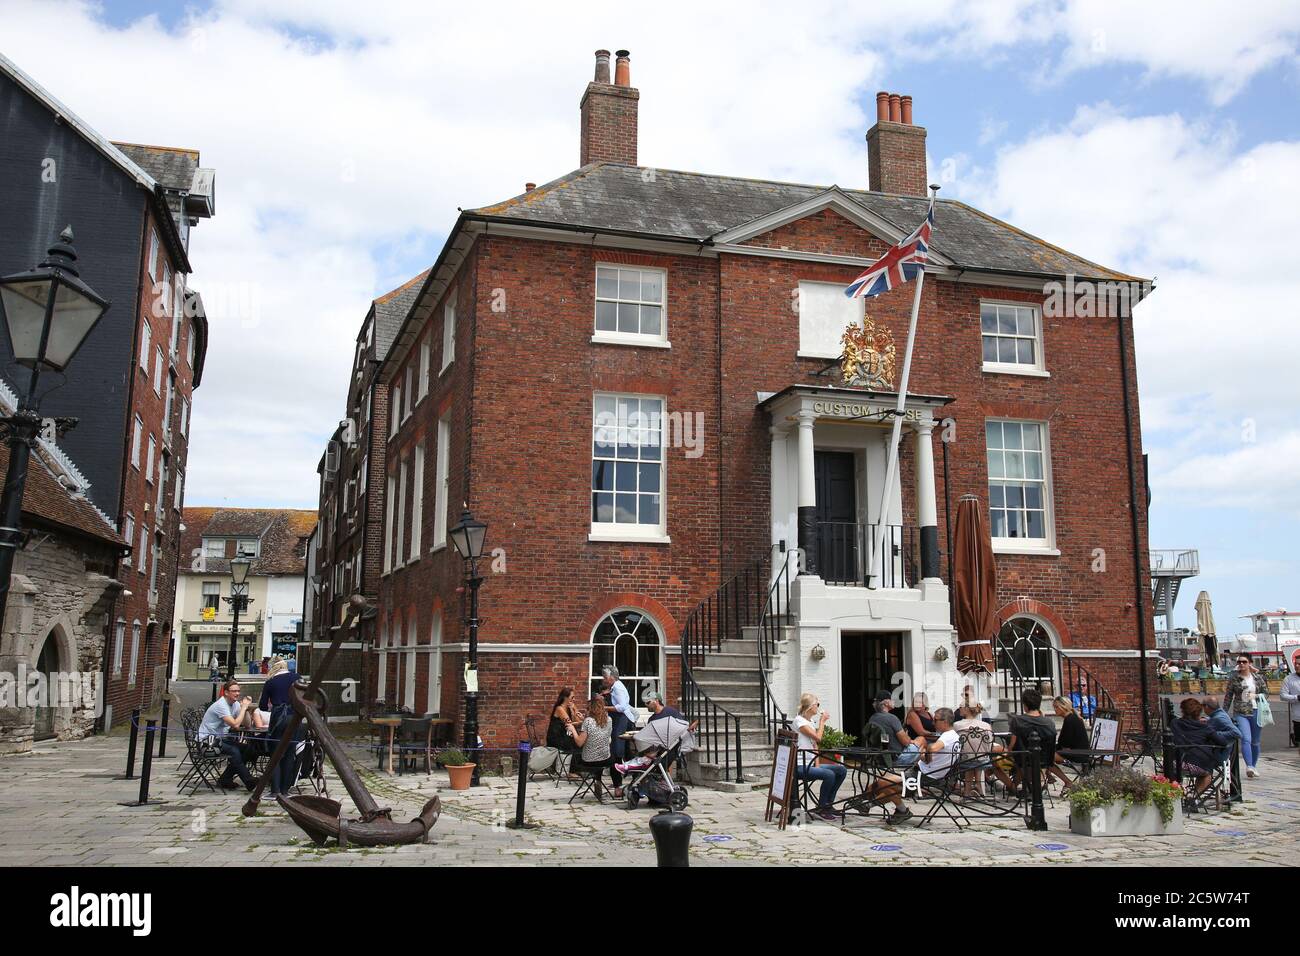 Poole, UK. 5th July 2020. The Old Custom House Cafe on Poole Quay bustling with life as cafes and pubs reopened this weekend . Credit: Richard Crease/Alamy Live News Stock Photo